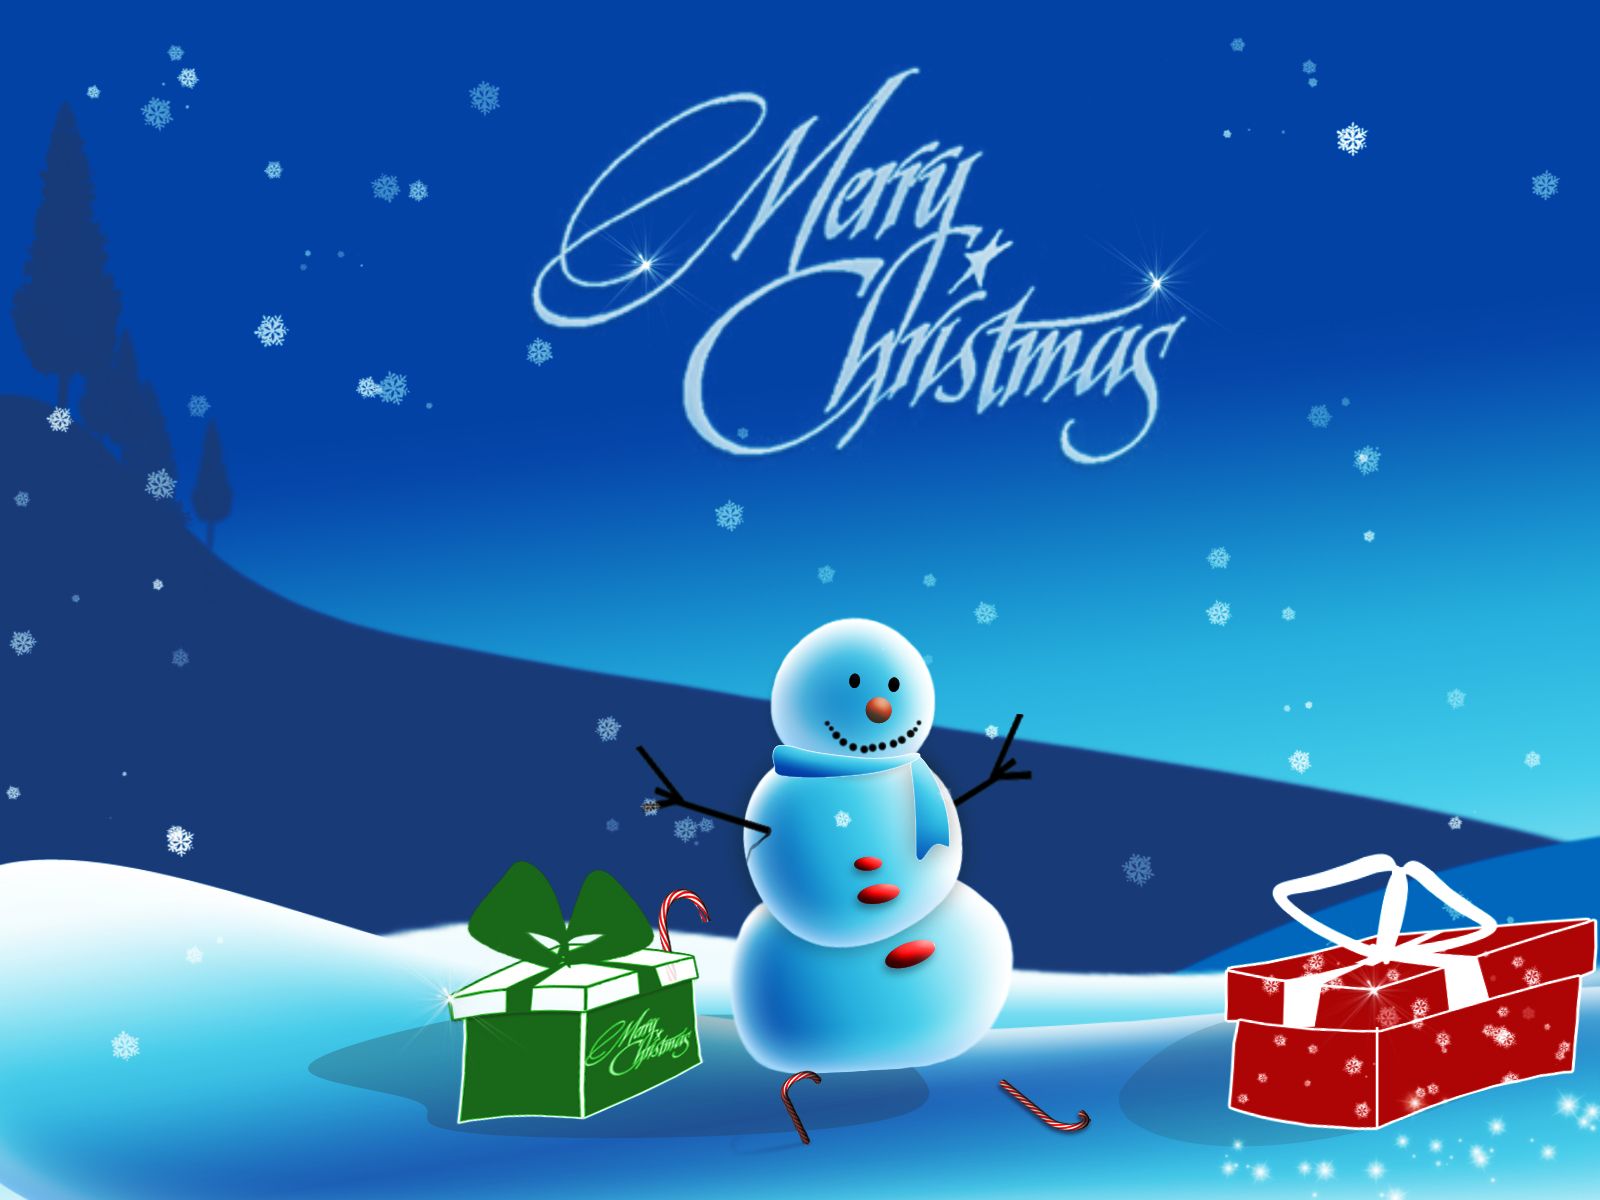 Merry Christmas Wallpaper “Share Your Feelings Or Show Your Love